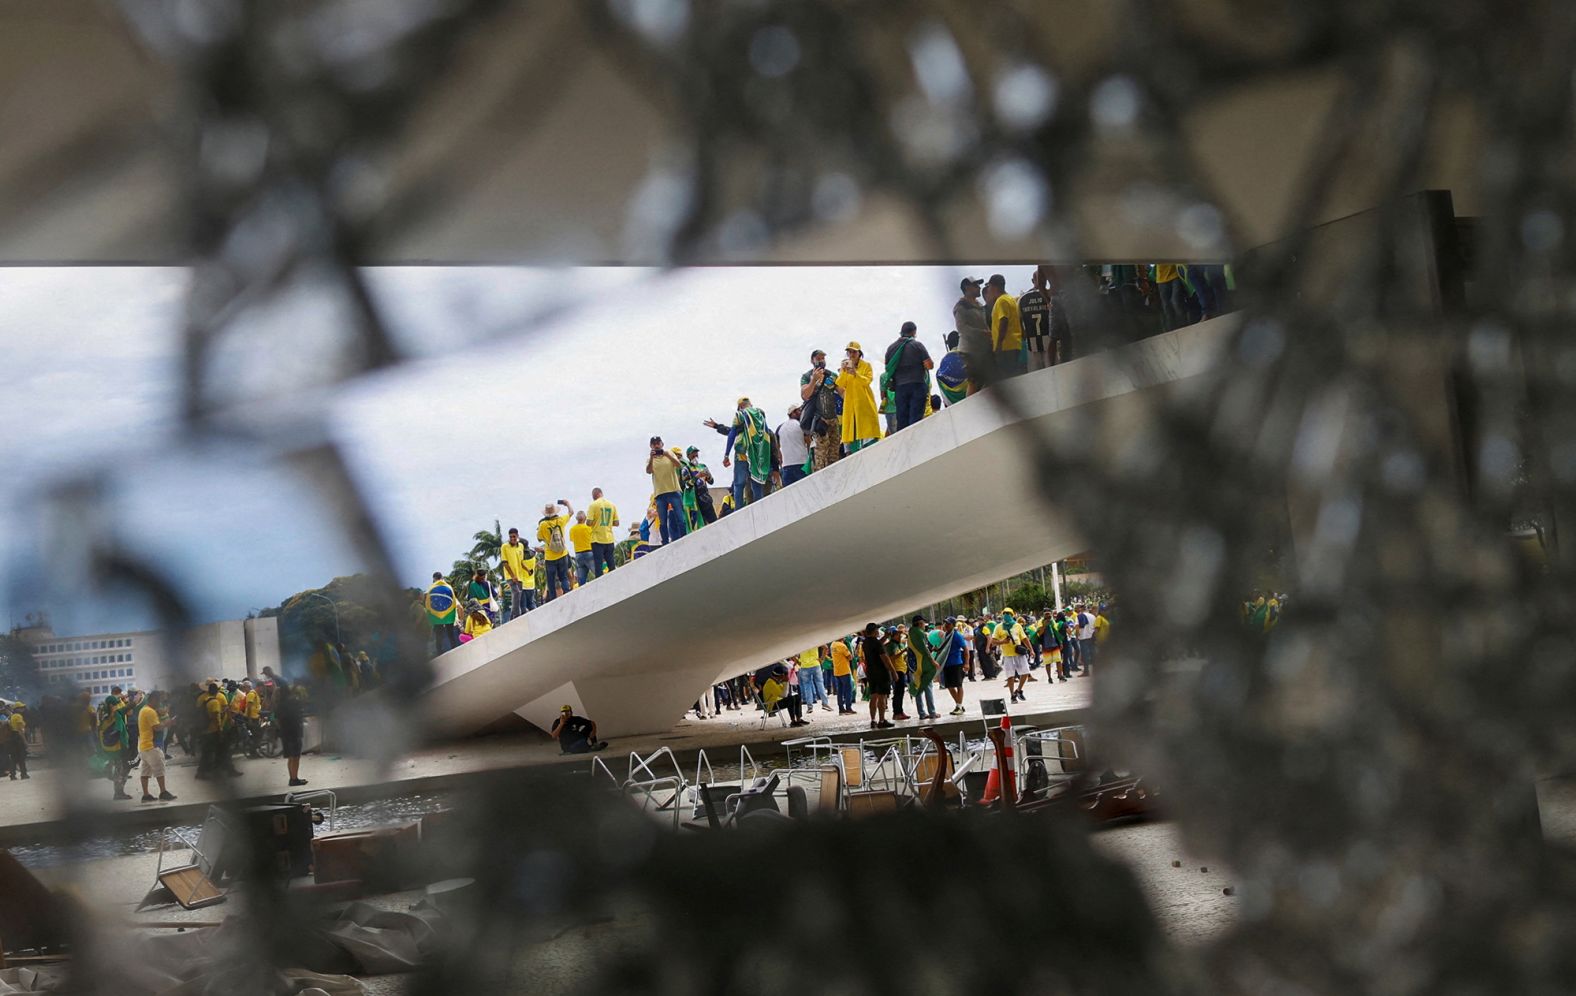 Supporters of former Brazilian President Jair Bolsonaro are pictured through broken glass on Sunday, January 8. Hundreds of Bolsonaro supporters <a href="index.php?page=&url=http%3A%2F%2Fwww.cnn.com%2F2023%2F01%2F09%2Fworld%2Fgallery%2Fbolsonaro-supporters-storm-brazilian-congress%2Findex.html" target="_blank">stormed major government buildings in Brasilia</a> on Sunday, including the congressional building and the Planalto Presidential Palace. The breaches came about a week after the inauguration of Brazilian President Luiz Inácio Lula da Silva, who defeated Bolsonaro in a runoff election on October 30. 